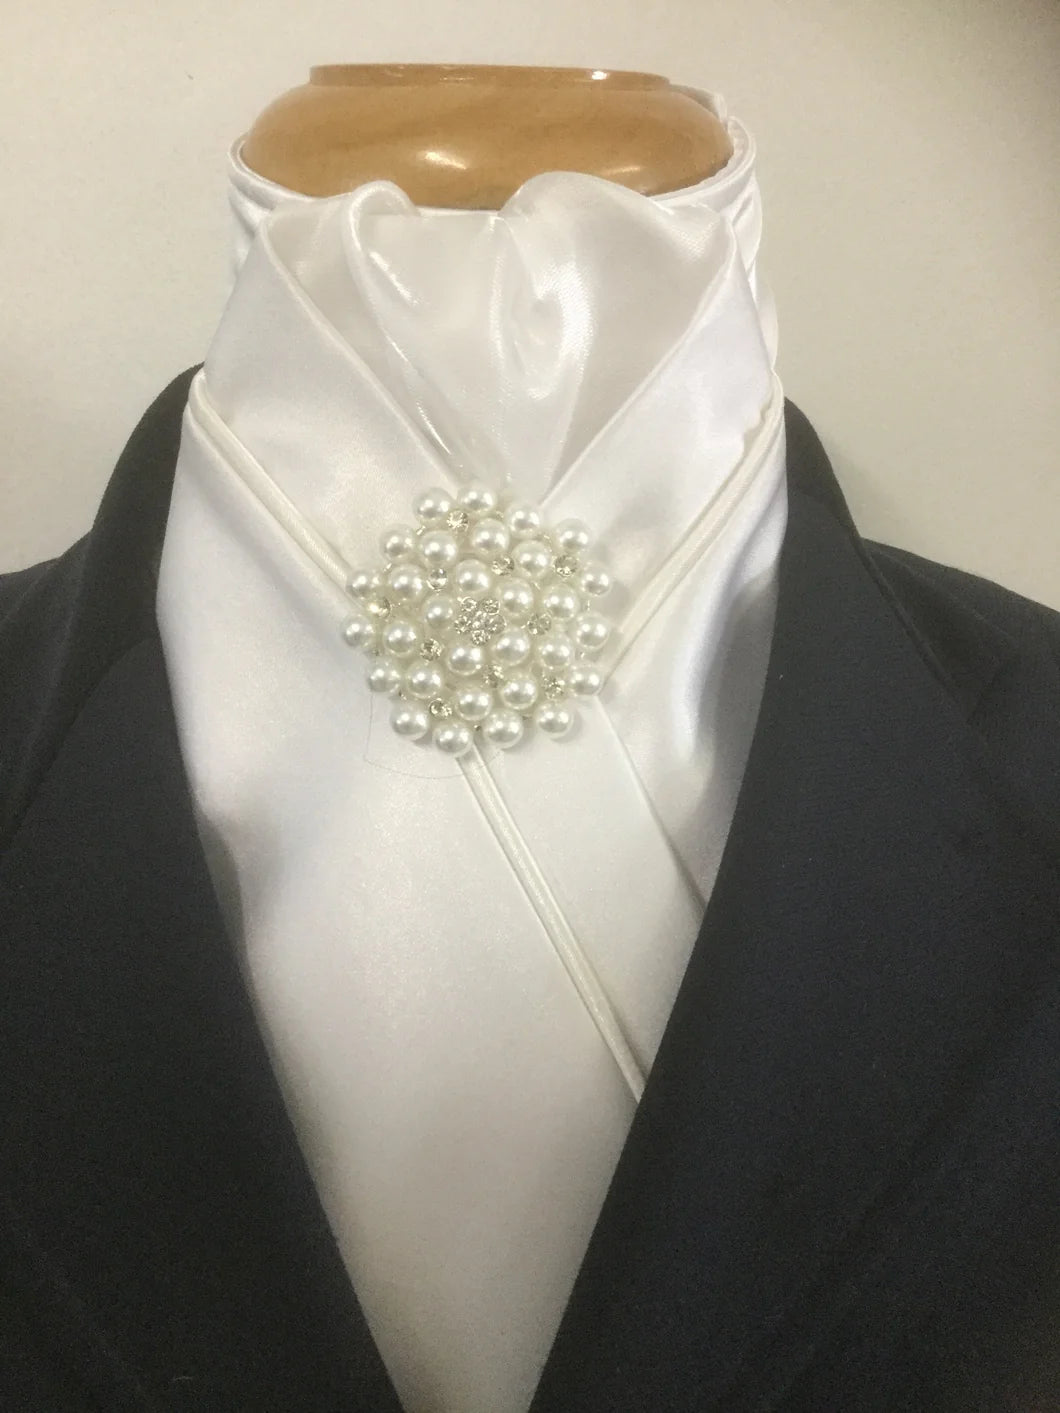 Heavenly Horse Design Custom White and Ivory Satin Stock Tie with a Stunning Pearl Rhinestone Pin